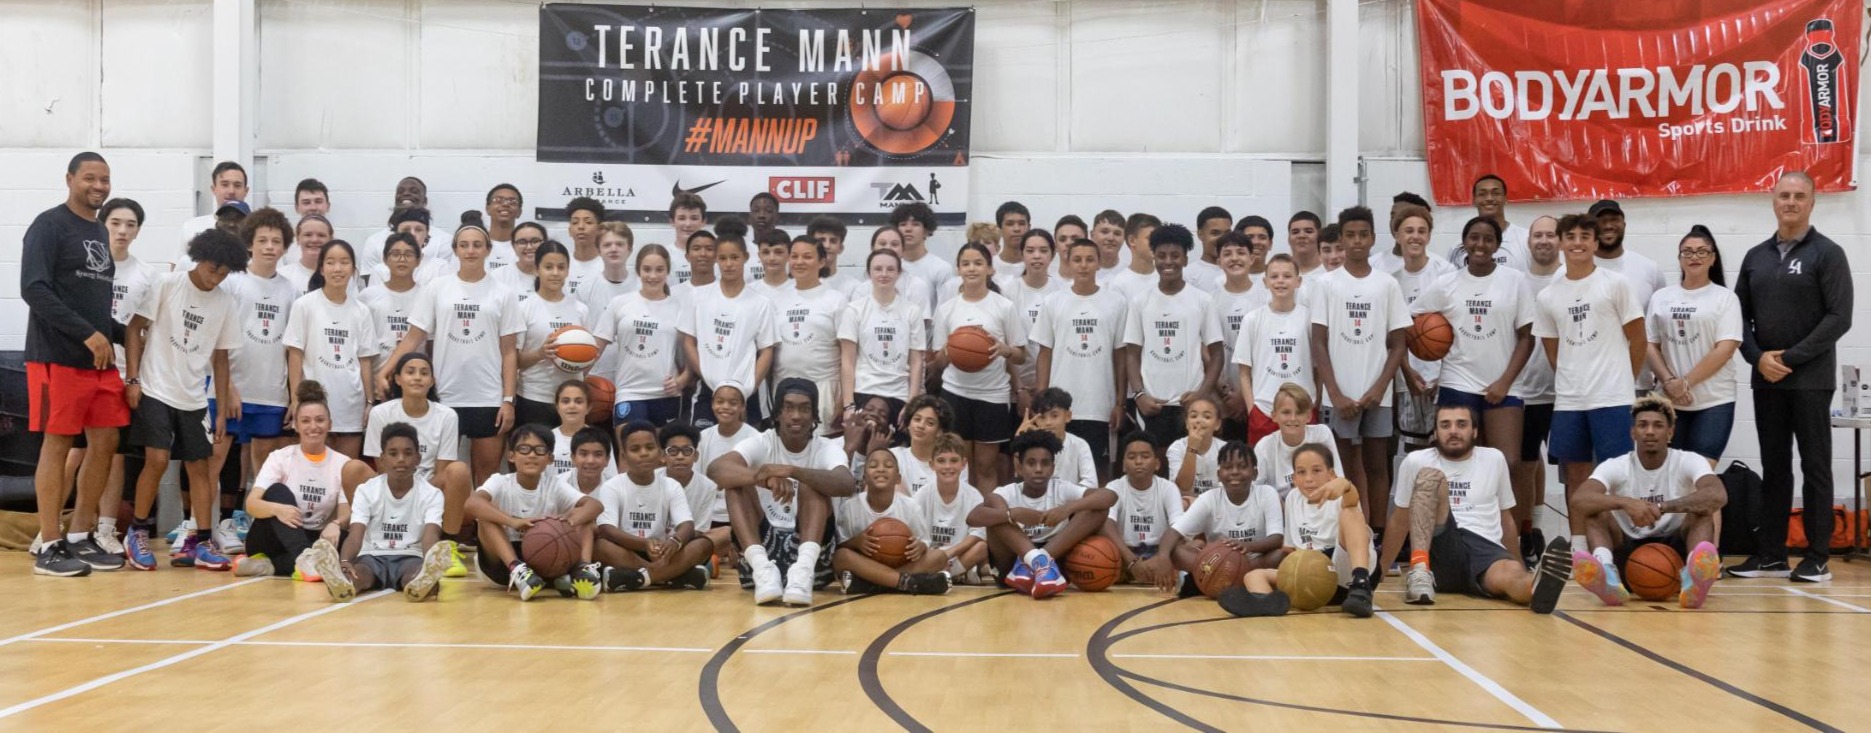 Lowell's Terance Mann opens Complete Player Basketball Camp